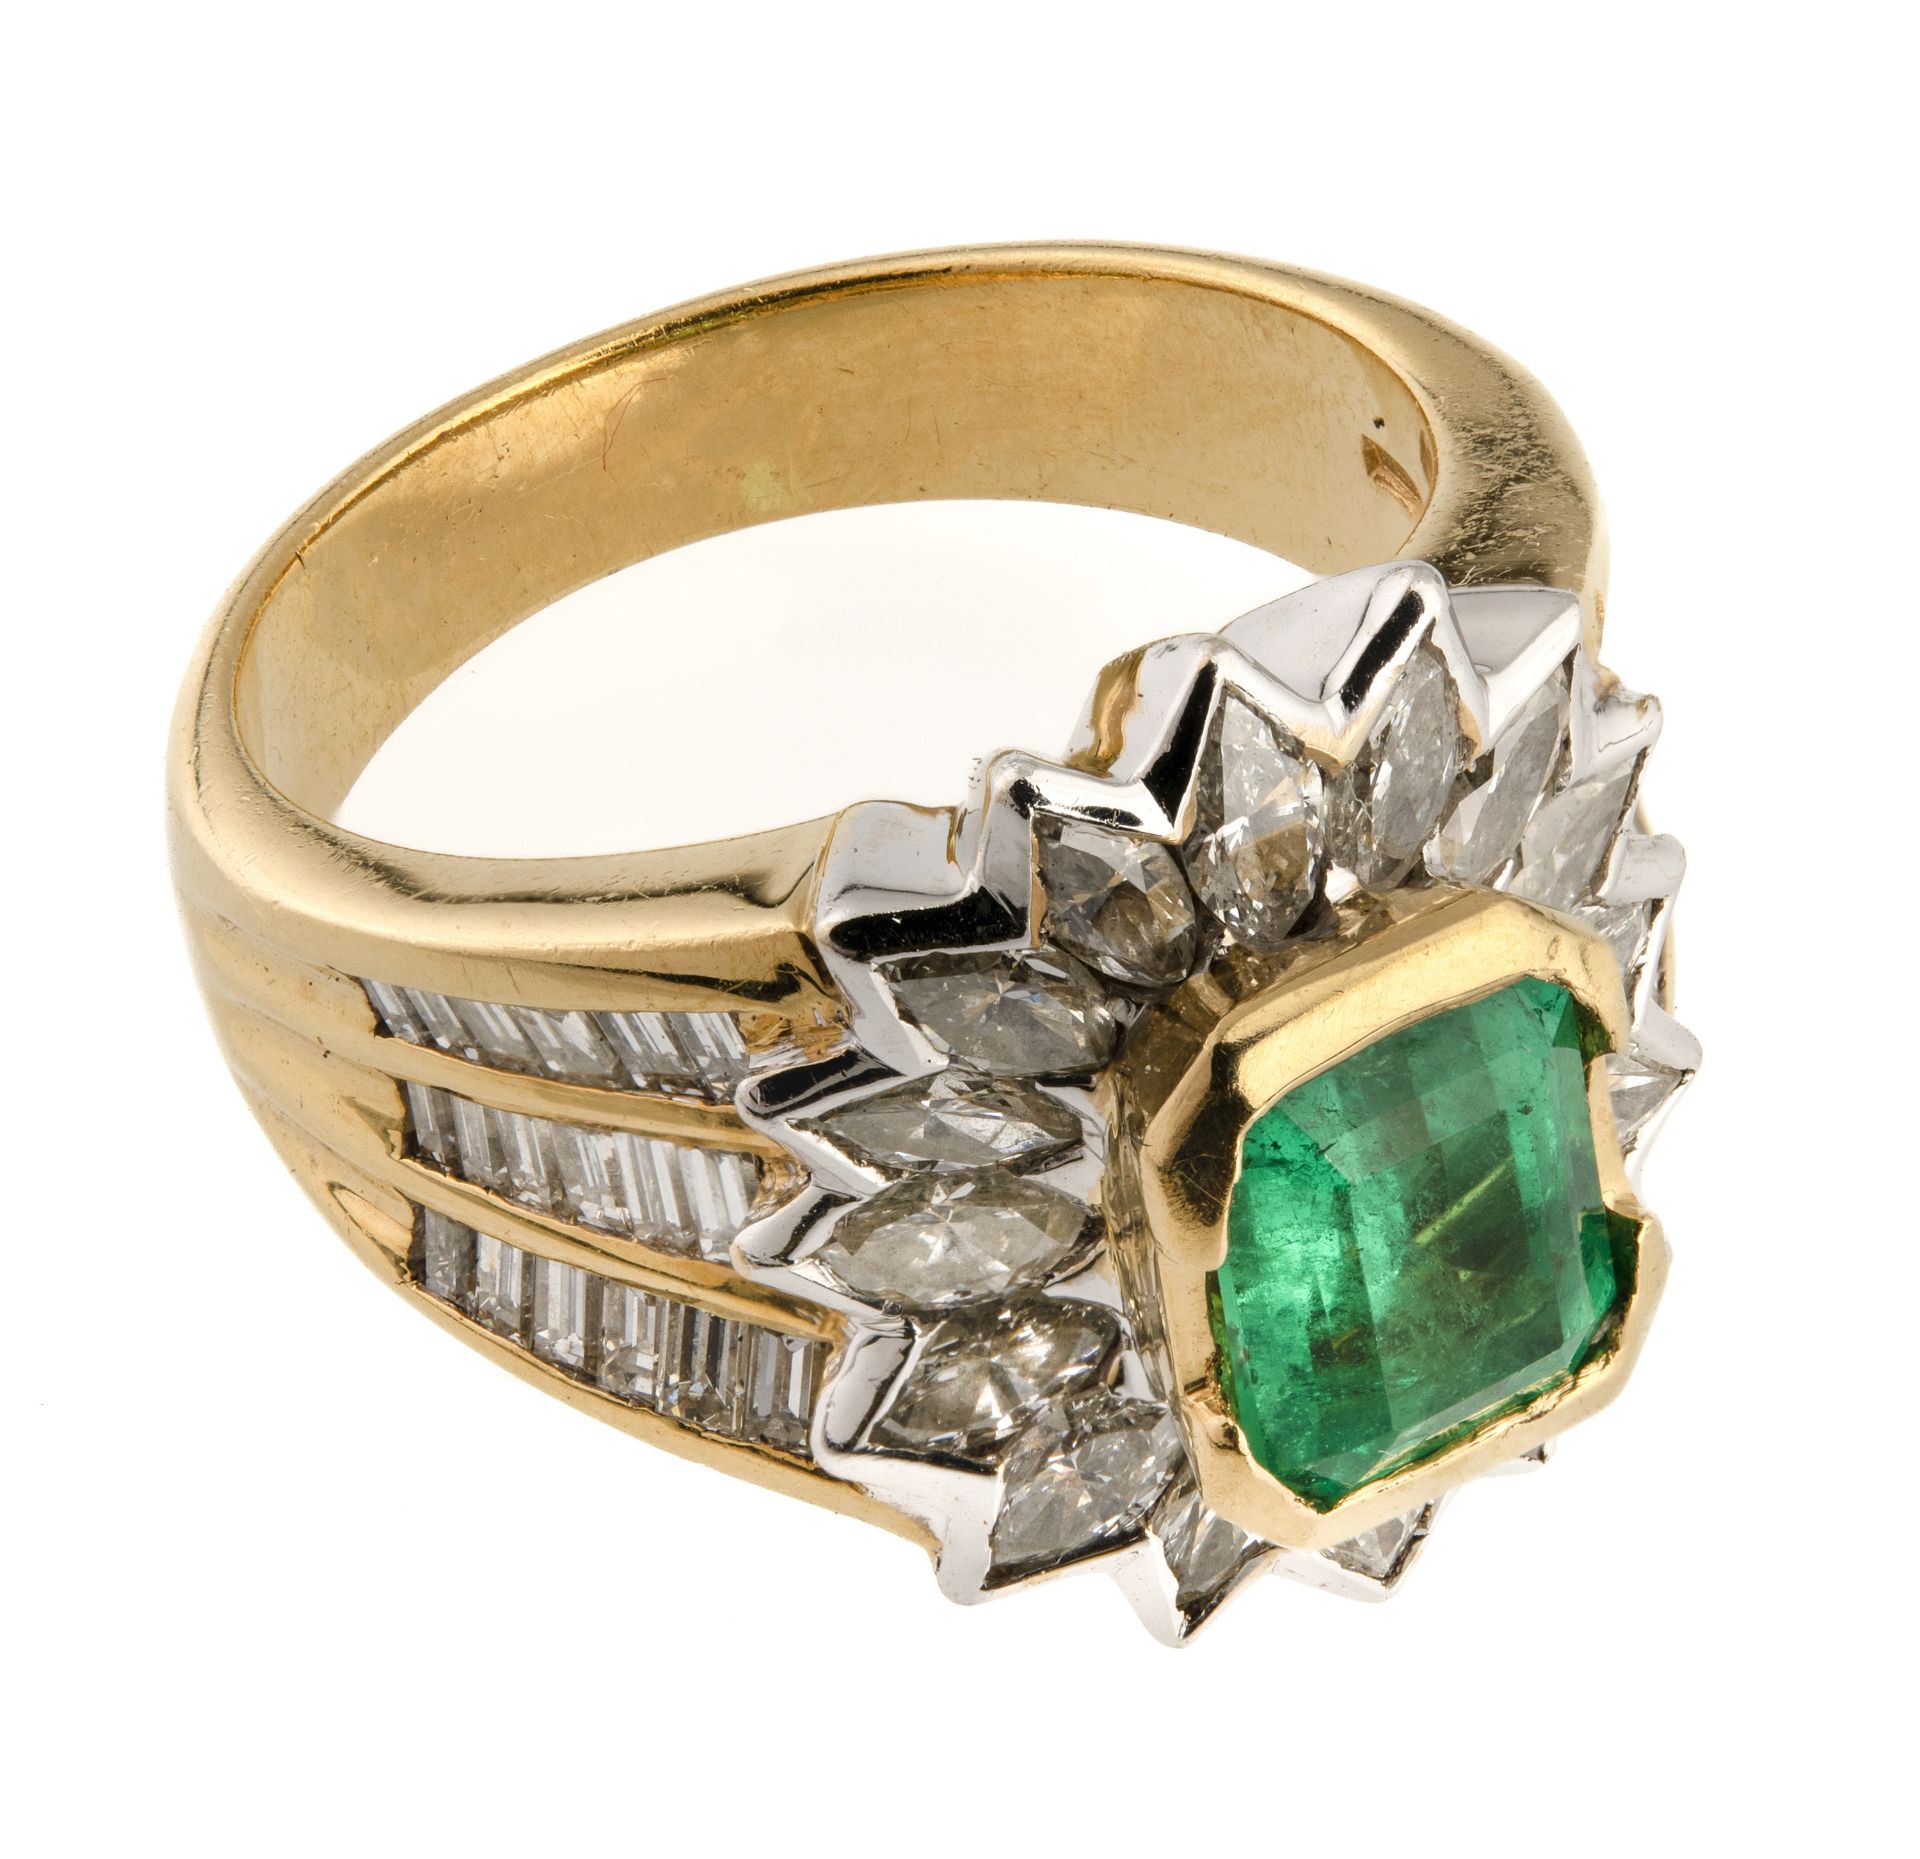 BEAUTIFUL GOLD RING WITH EMERALD AND DIAMONDS